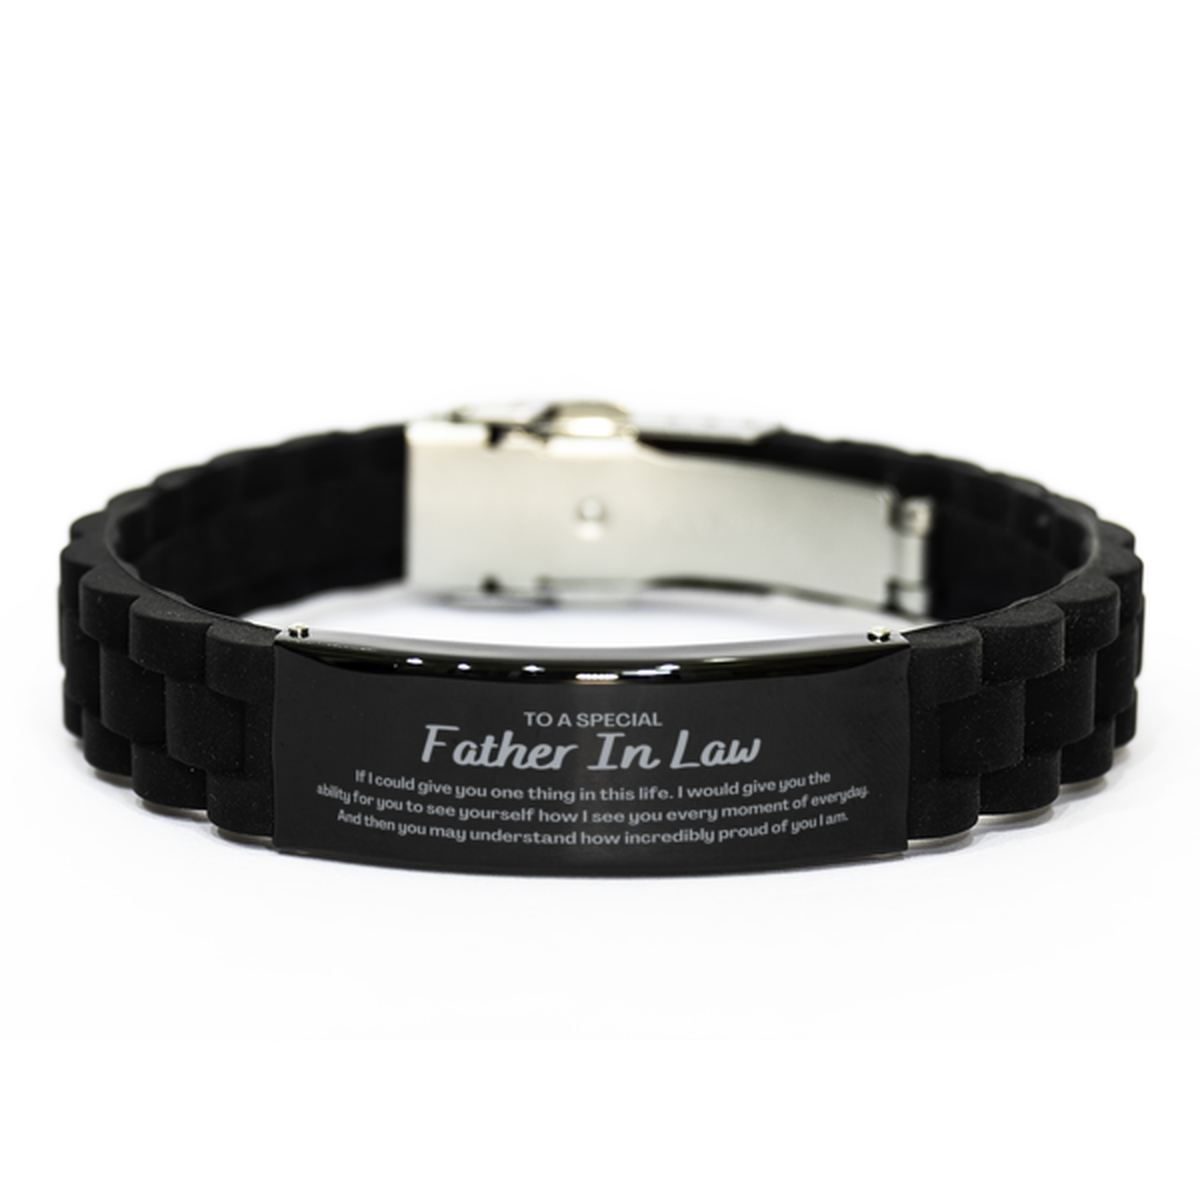 To My Father In Law Black Glidelock Clasp Bracelet, Gifts For Father In Law Engraved, Inspirational Gifts for Christmas Birthday, Epic Gifts for Father In Law To A Special Father In Law how incredibly proud of you I am